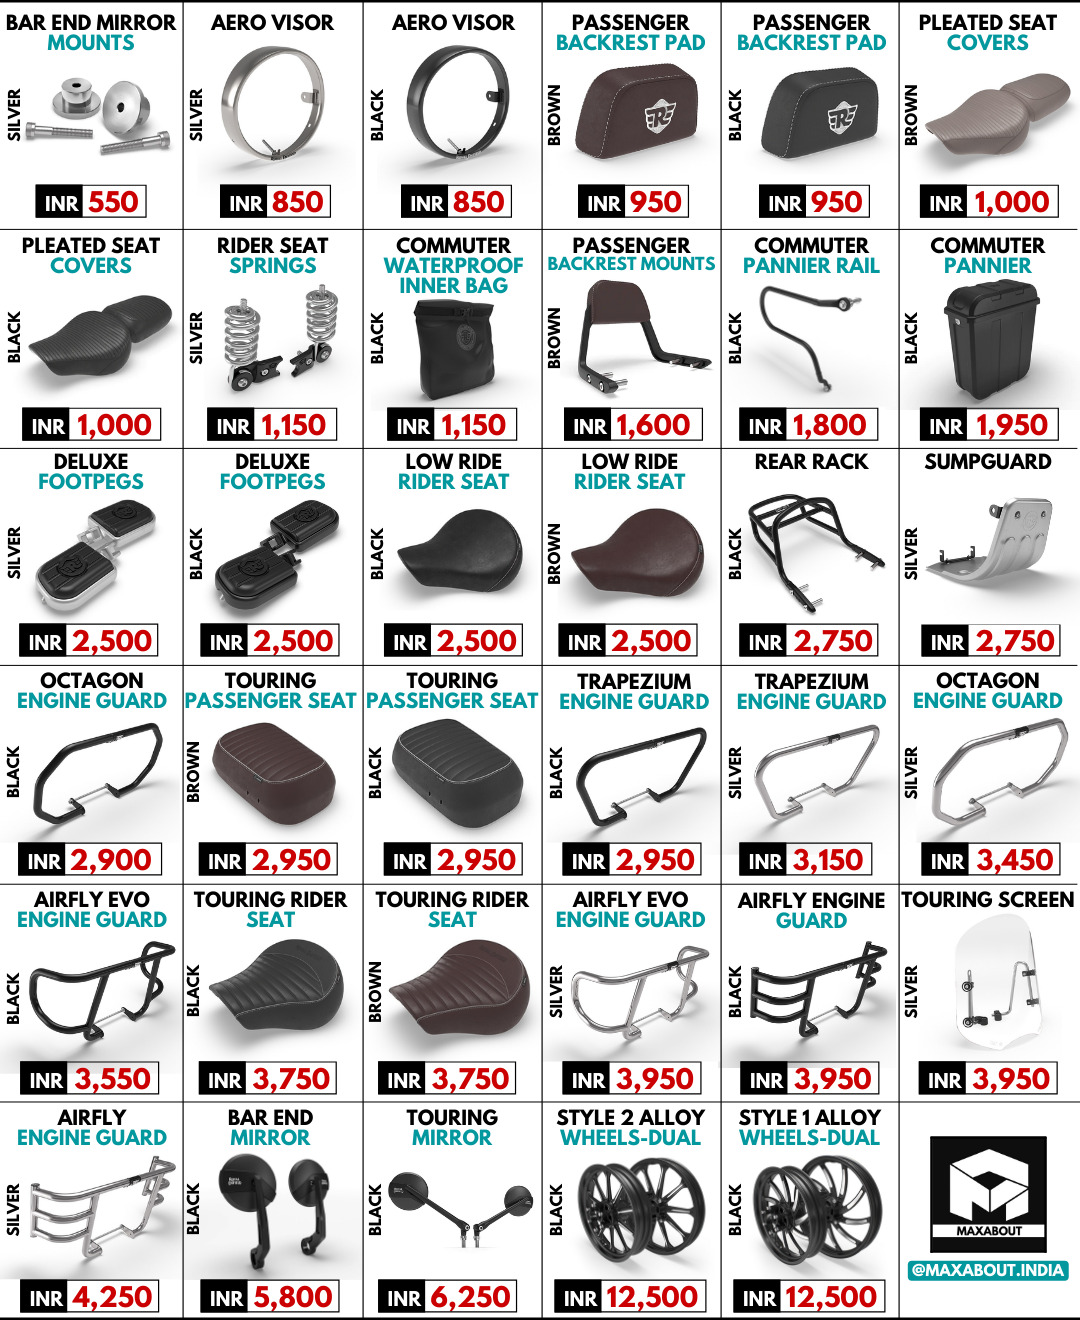 Royal Enfield Bullet Accessories Official Price List in India